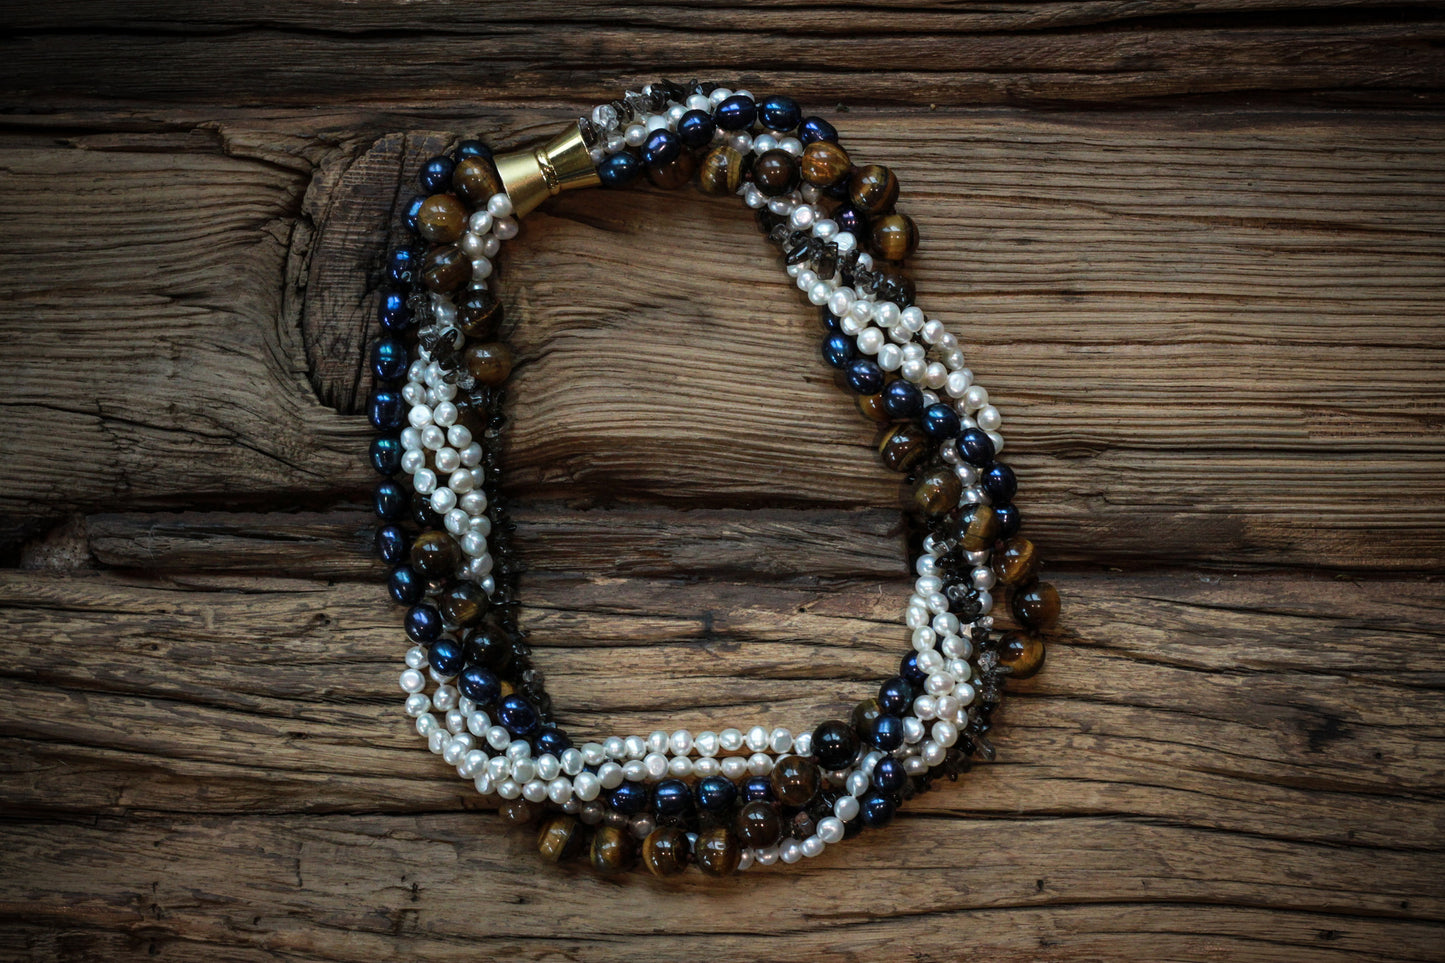 Chunky Necklace with White and Navy Pearls and Tiger's Eye Stones - Pearls4Girls